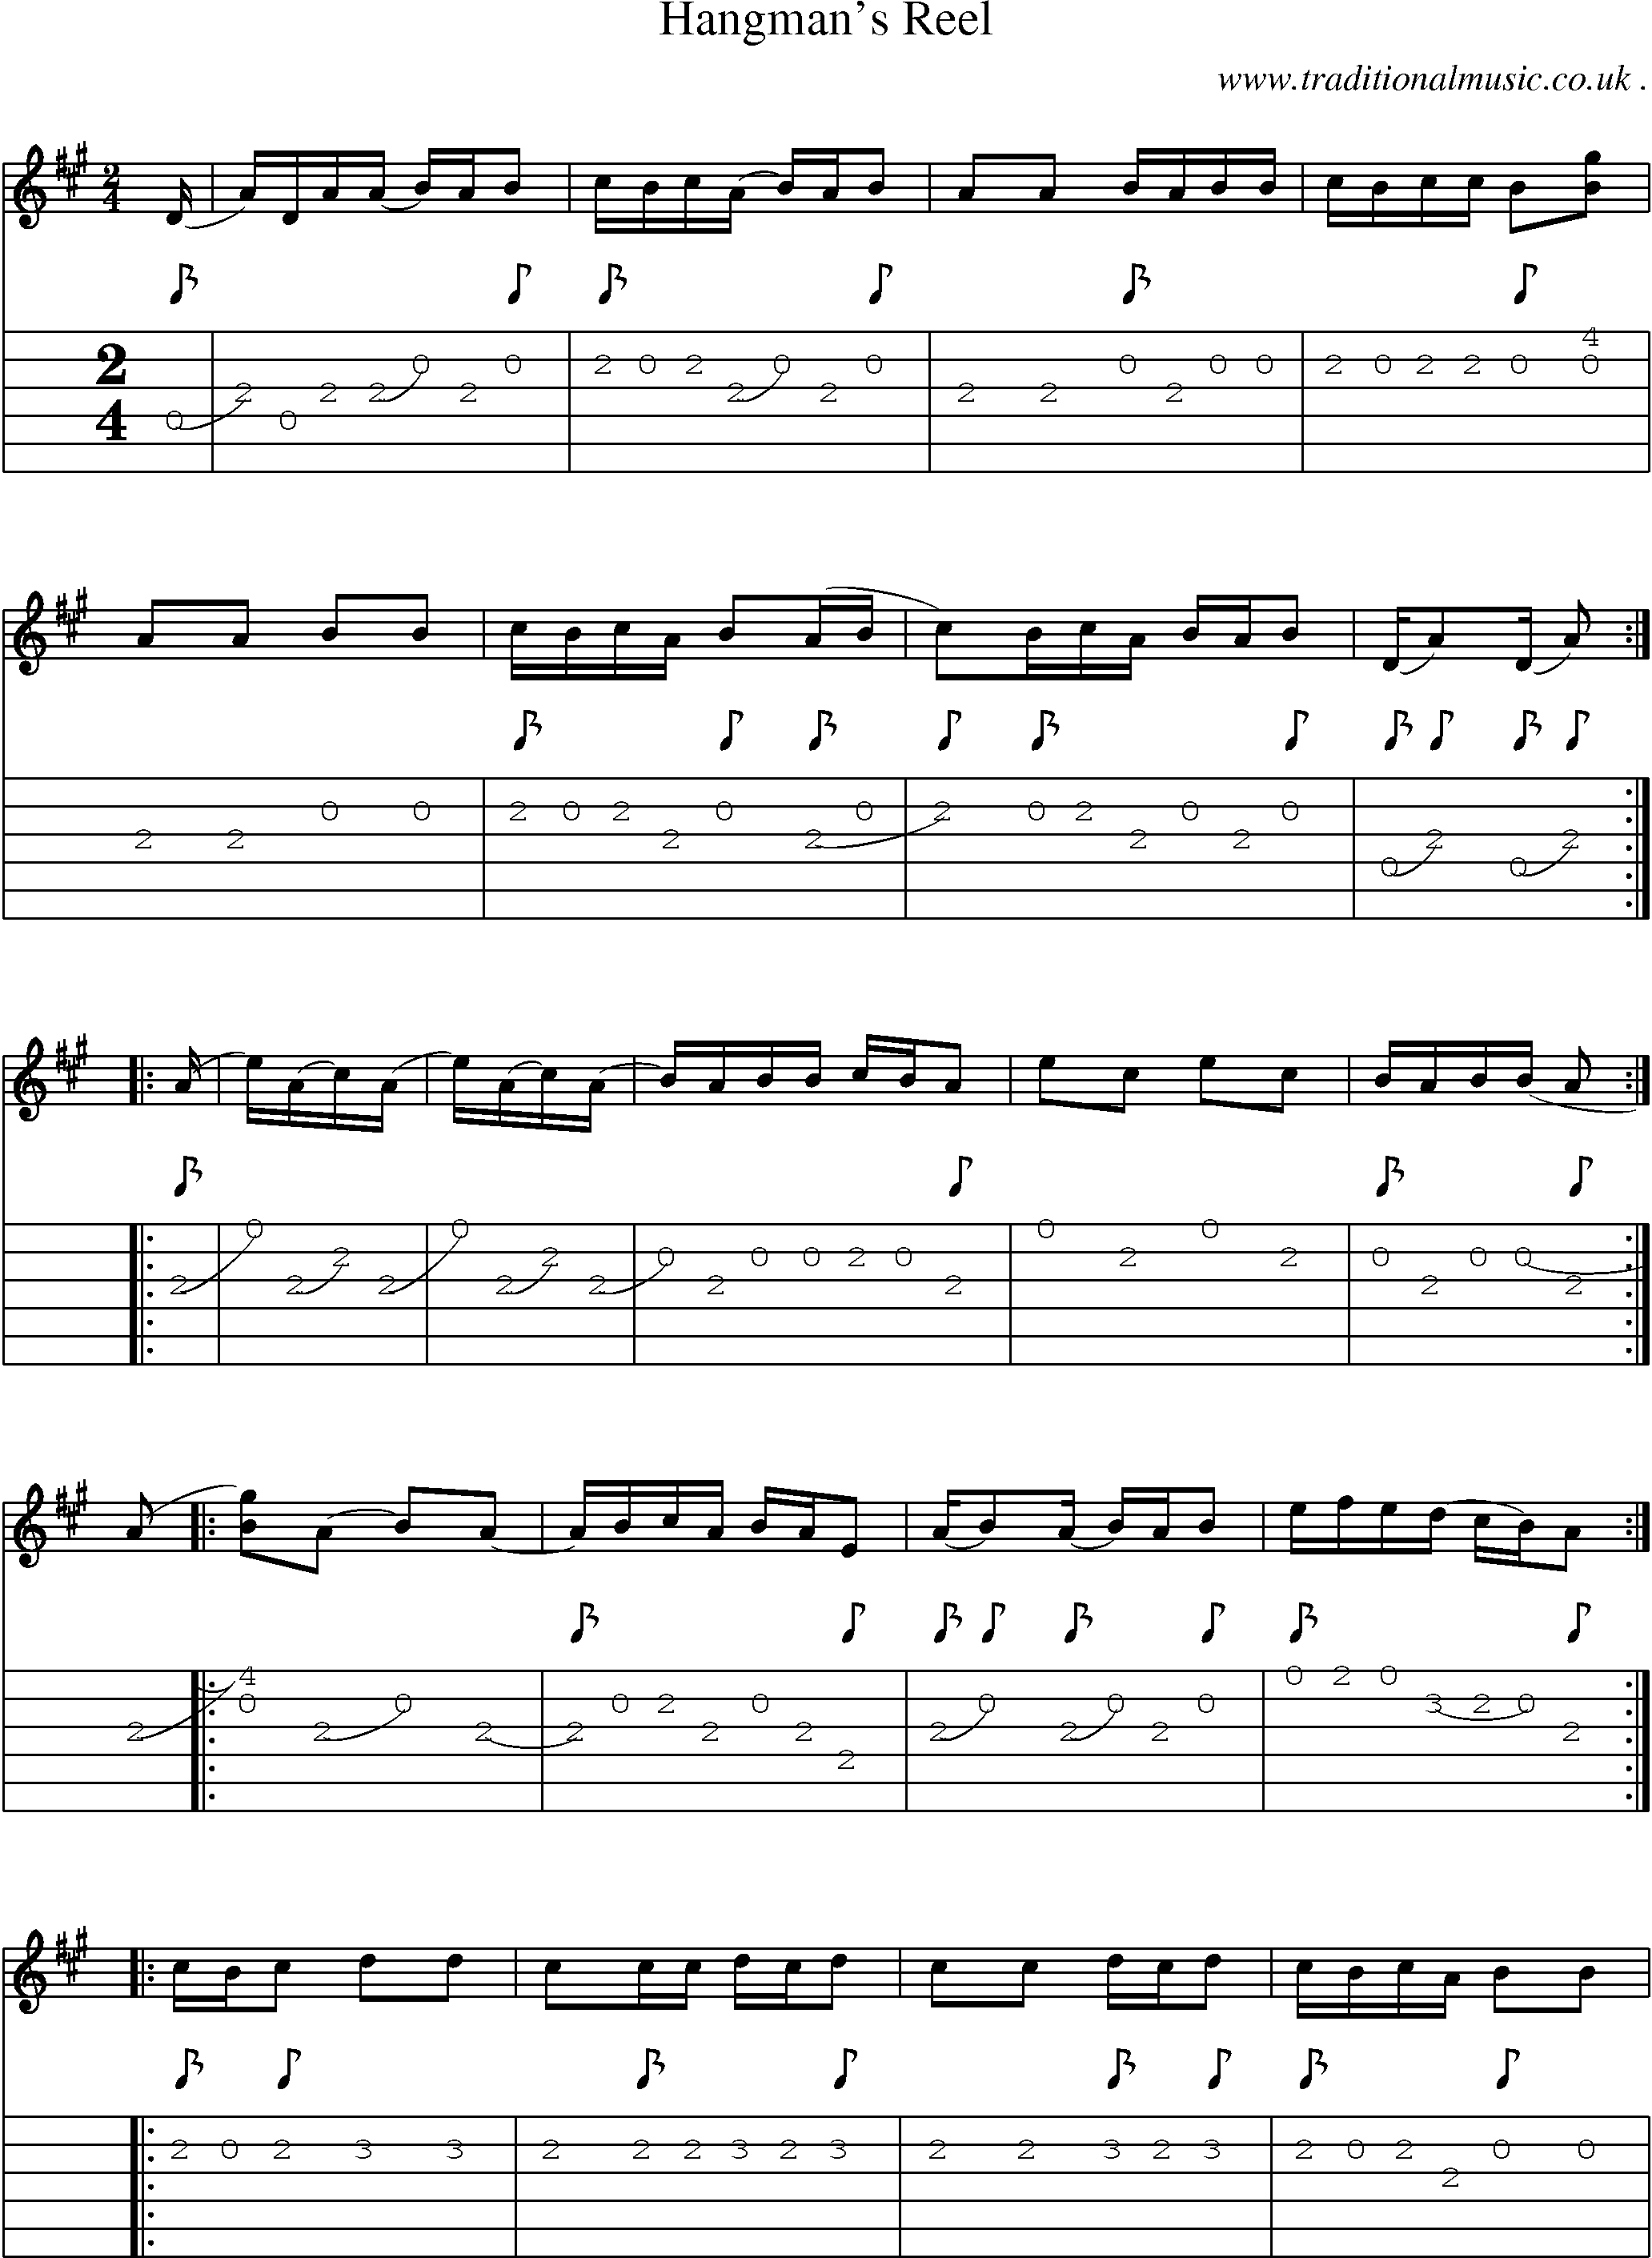 Music Score and Guitar Tabs for Hangmans Reel